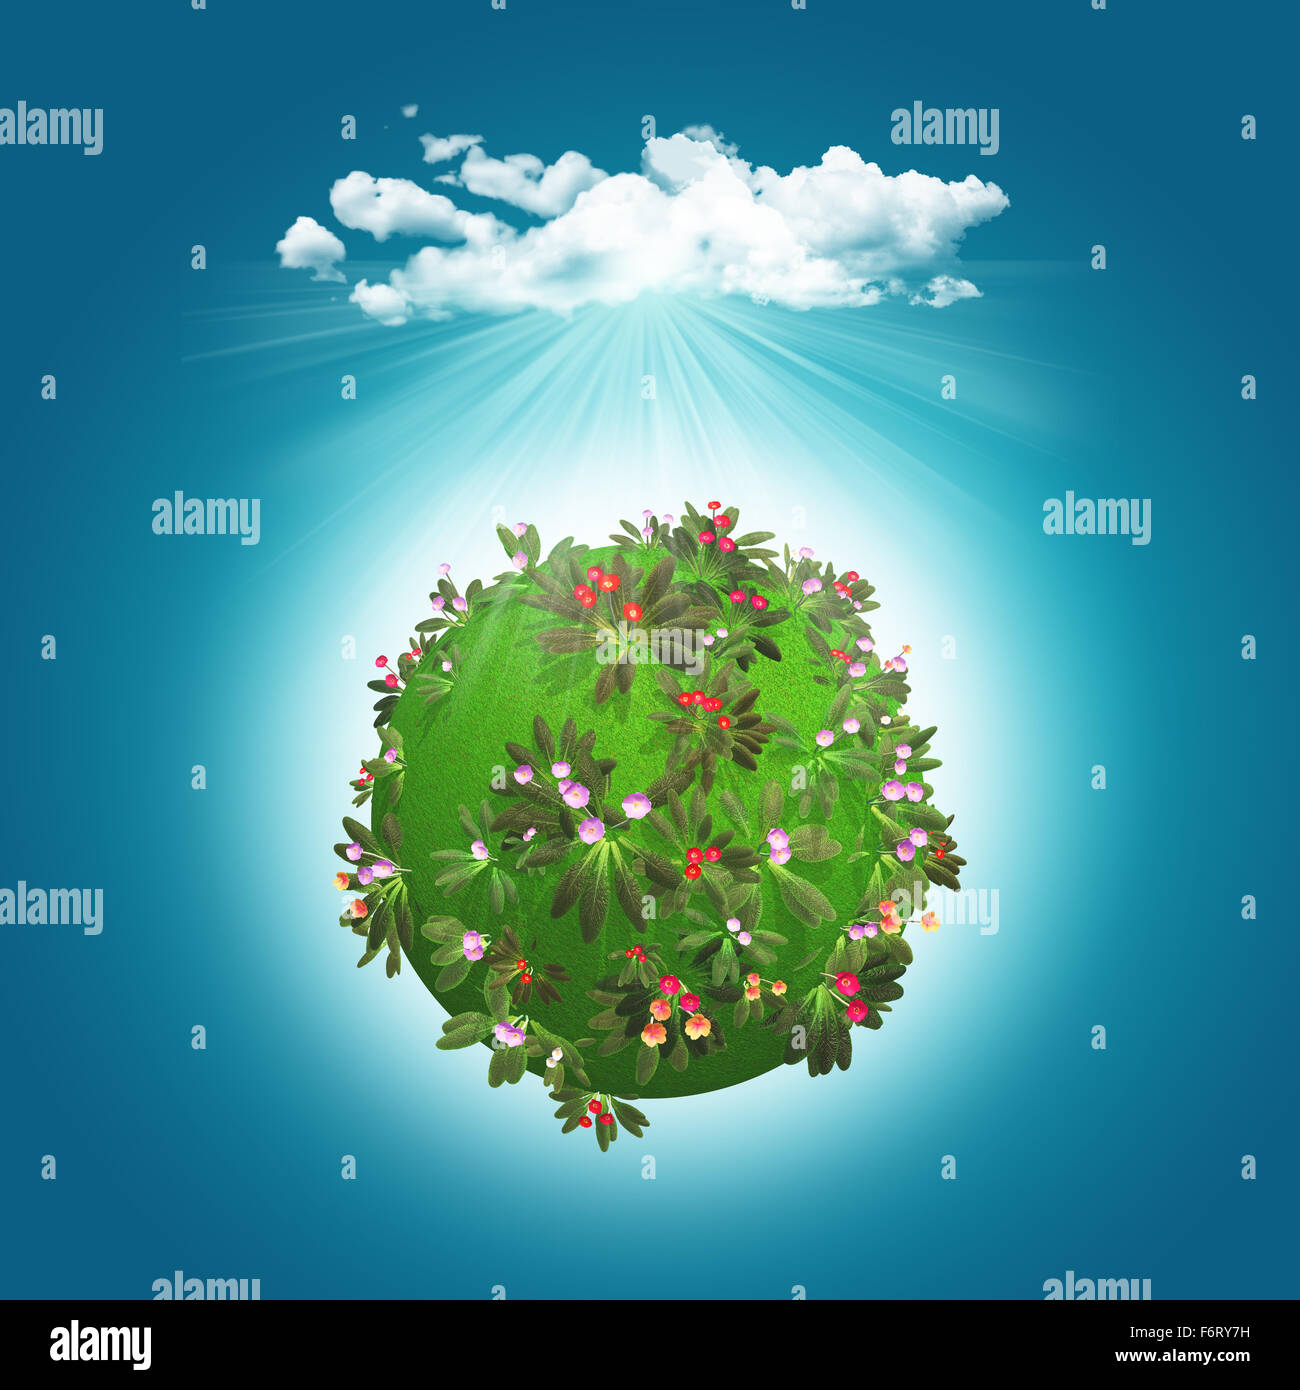 3D render of a grassy globe with flowers and sun shining from behind a cloud Stock Photo